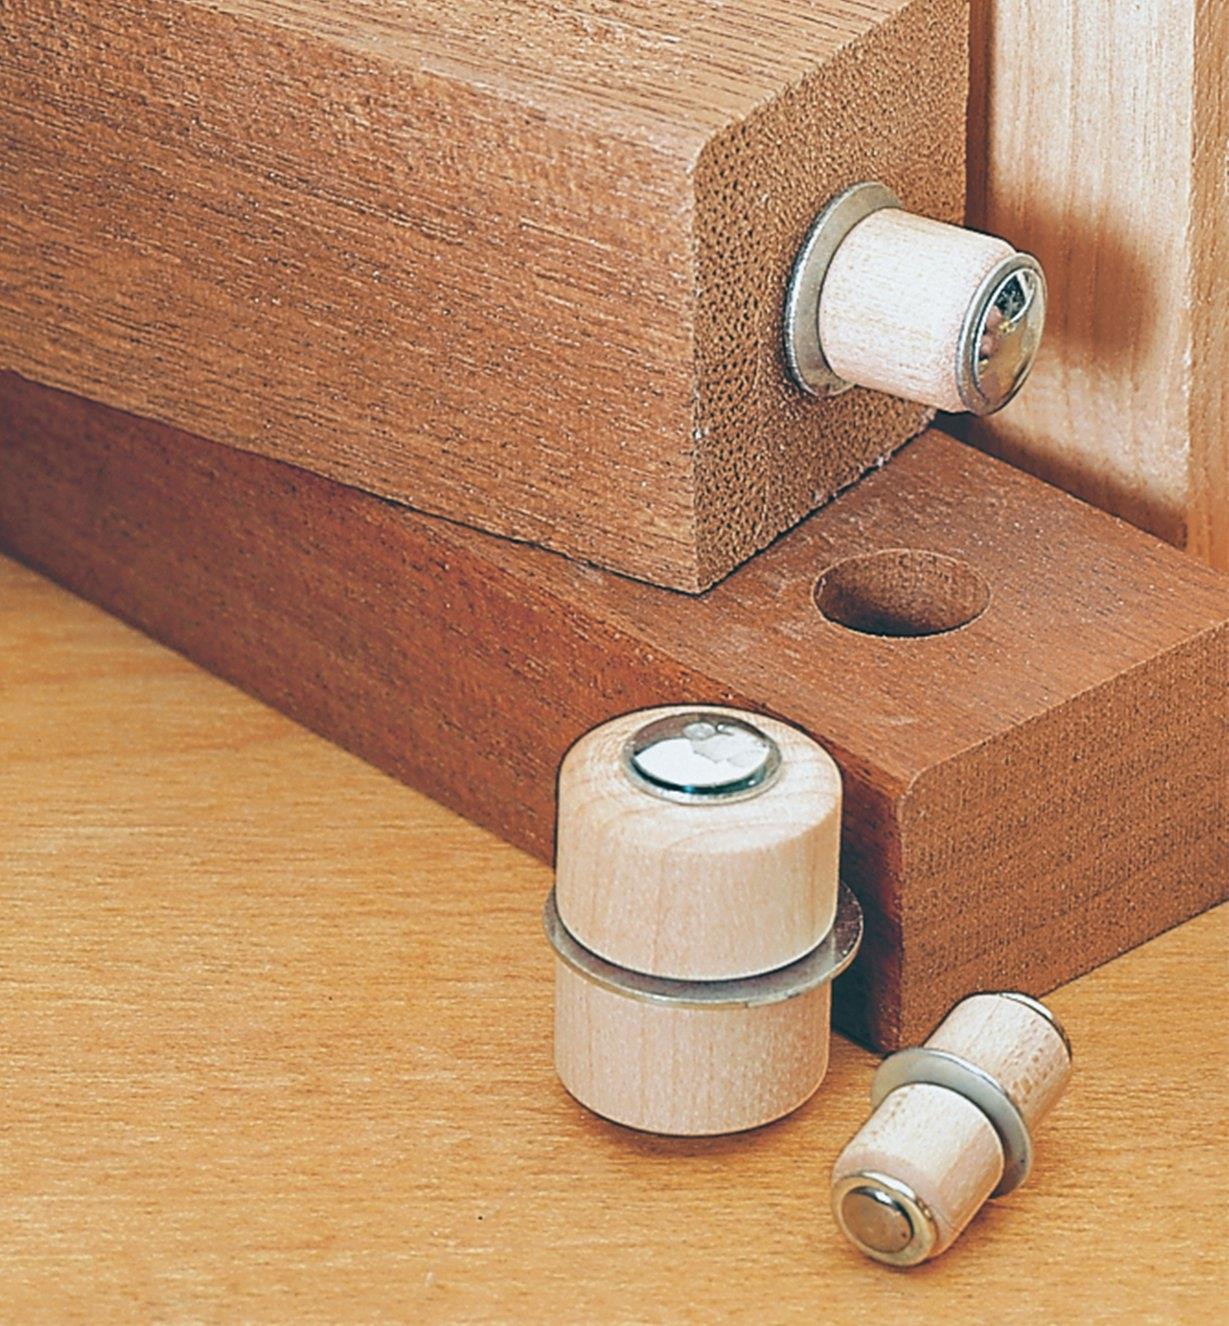 Roto-Hinges installed between two boards